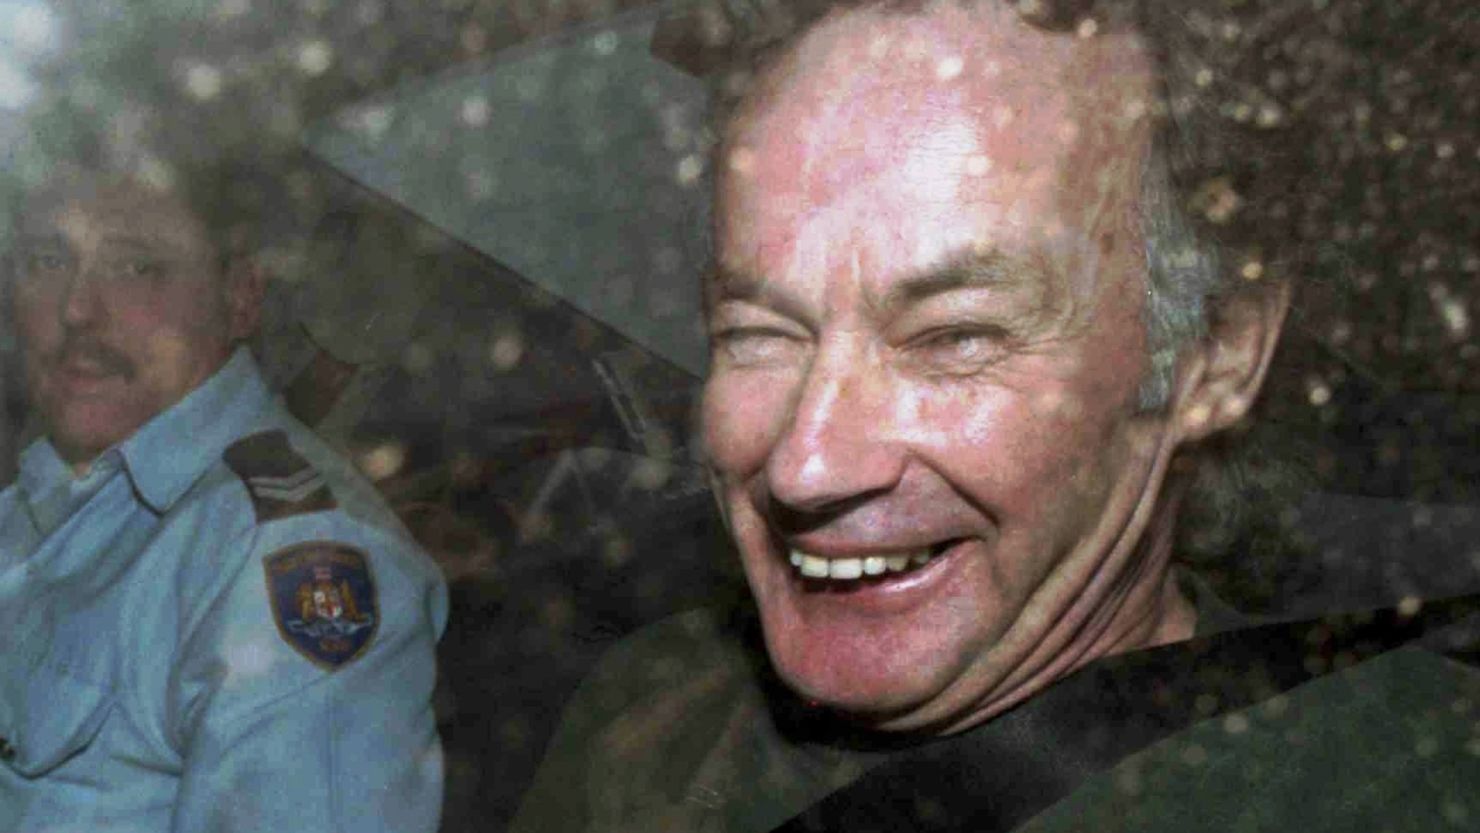 Ivan Milat smiles in a police car after attending a court in Sydney, Australia, on November 4, 1997.